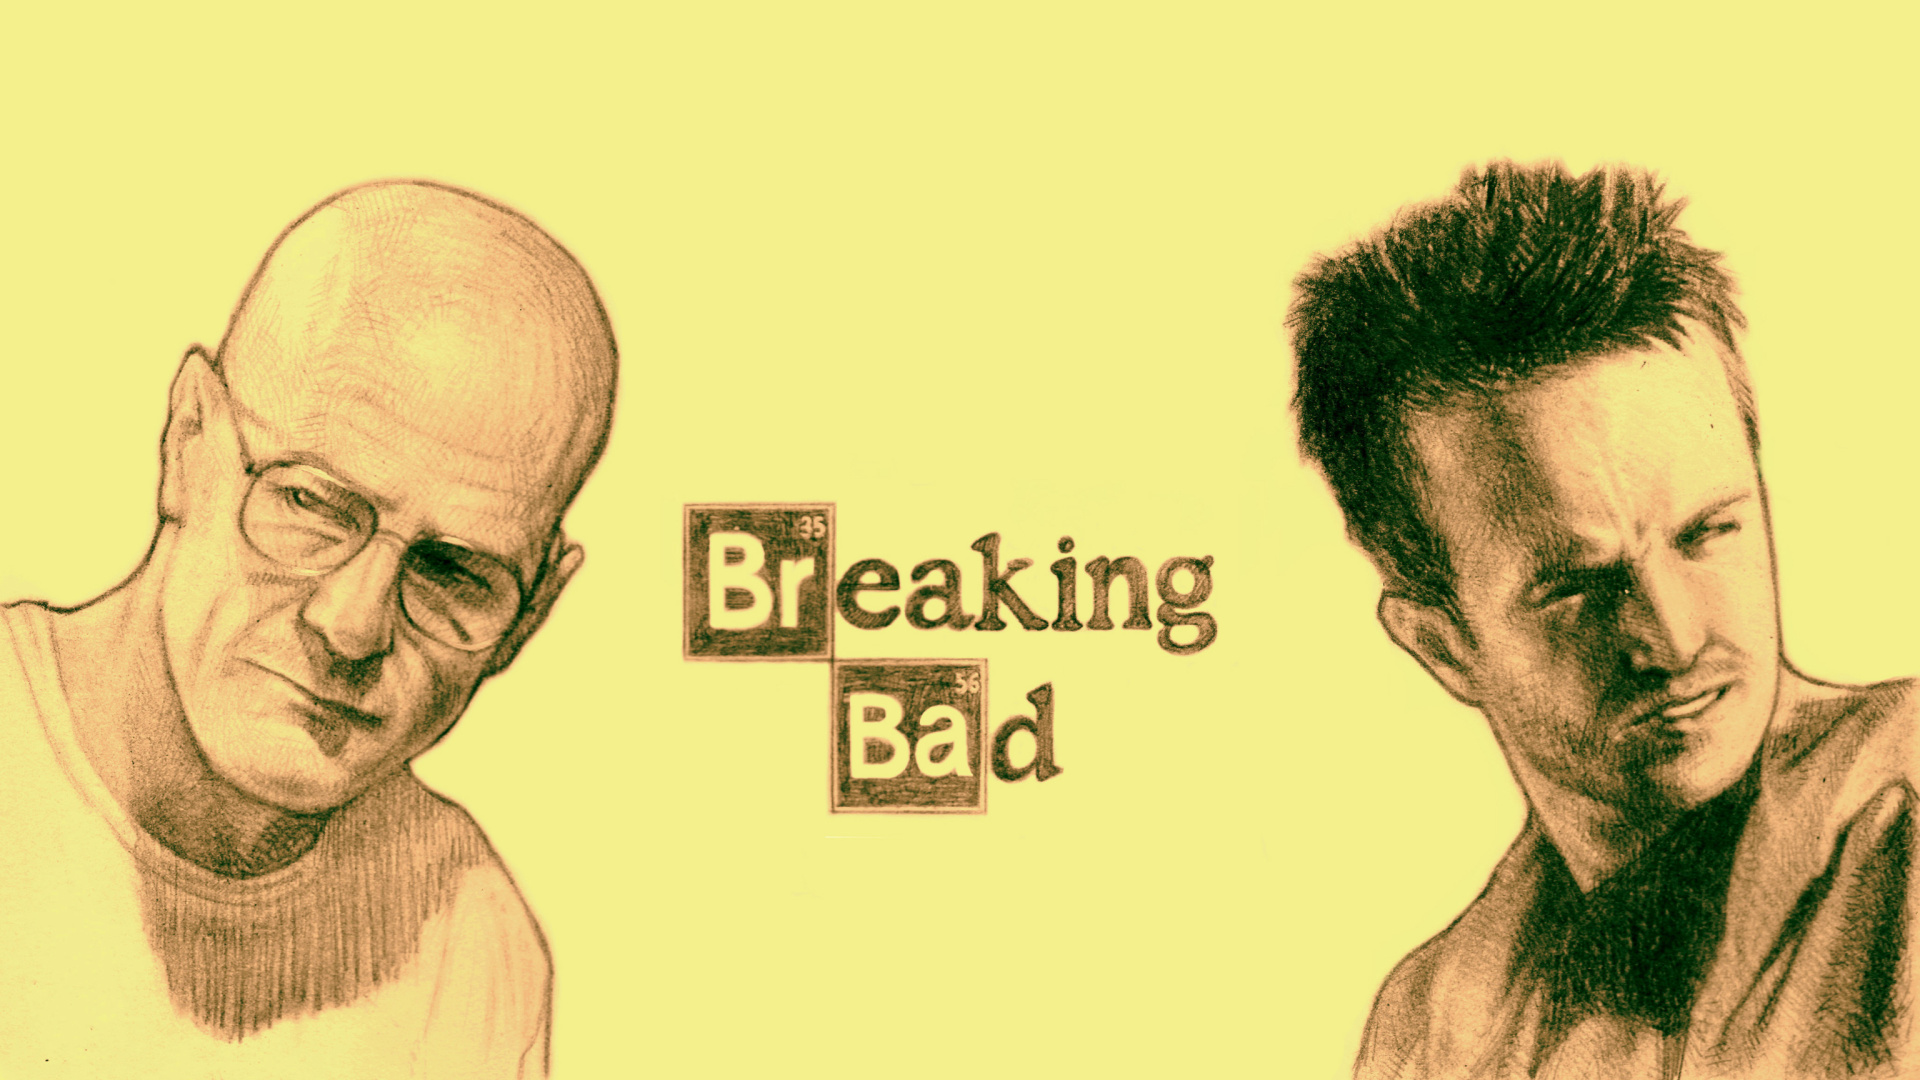 Walter White and Jesse Pinkman in Breaking Bad wallpaper 1920x1080